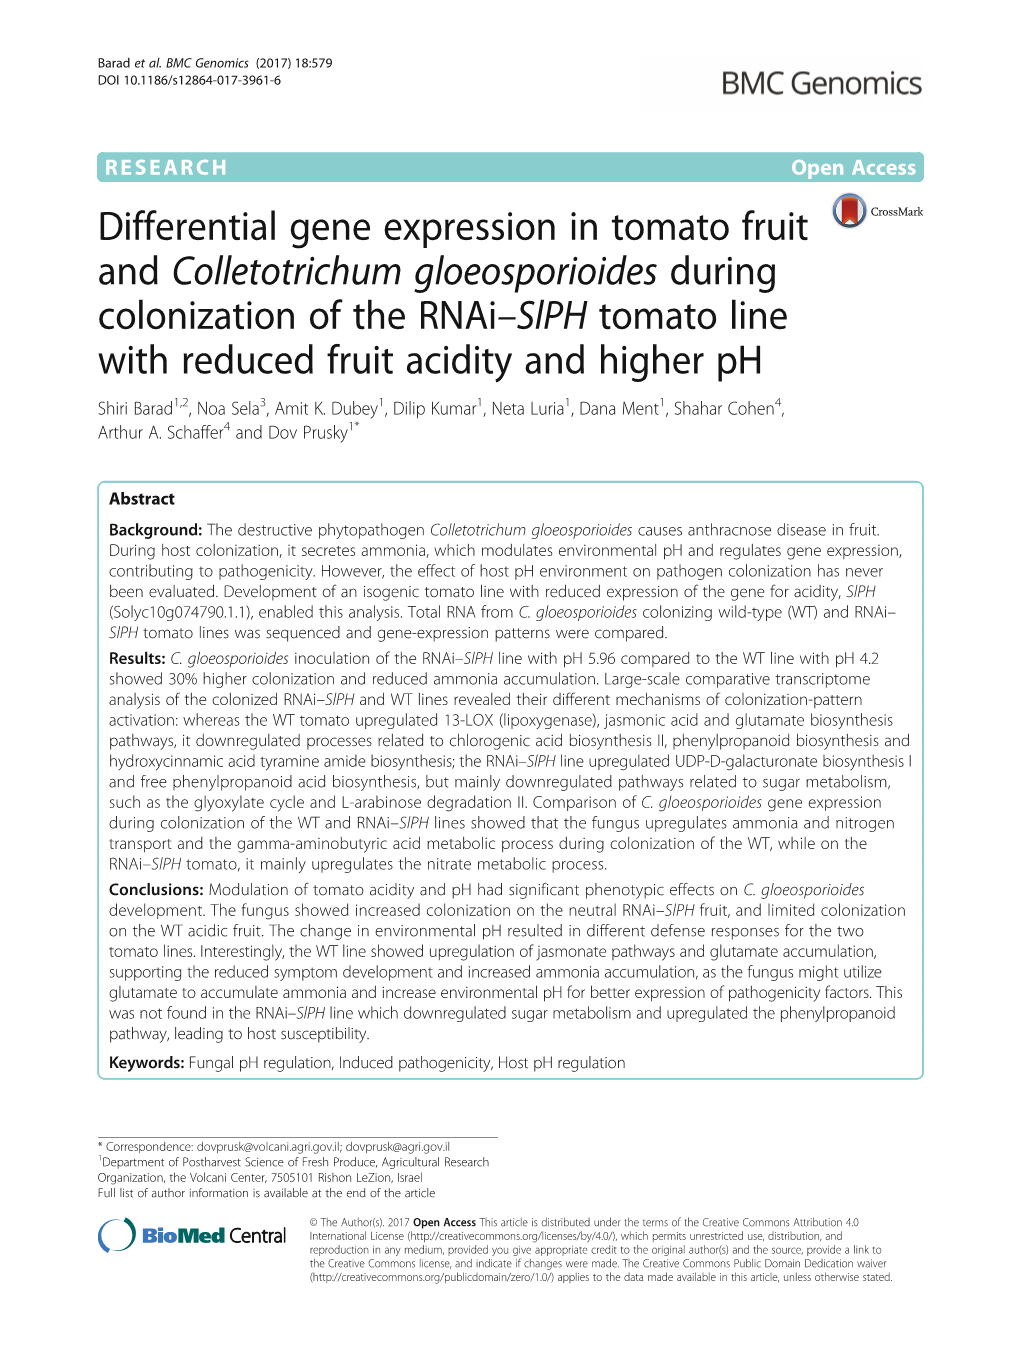 Differential Gene Expression in Tomato Fruit and Colletotrichum